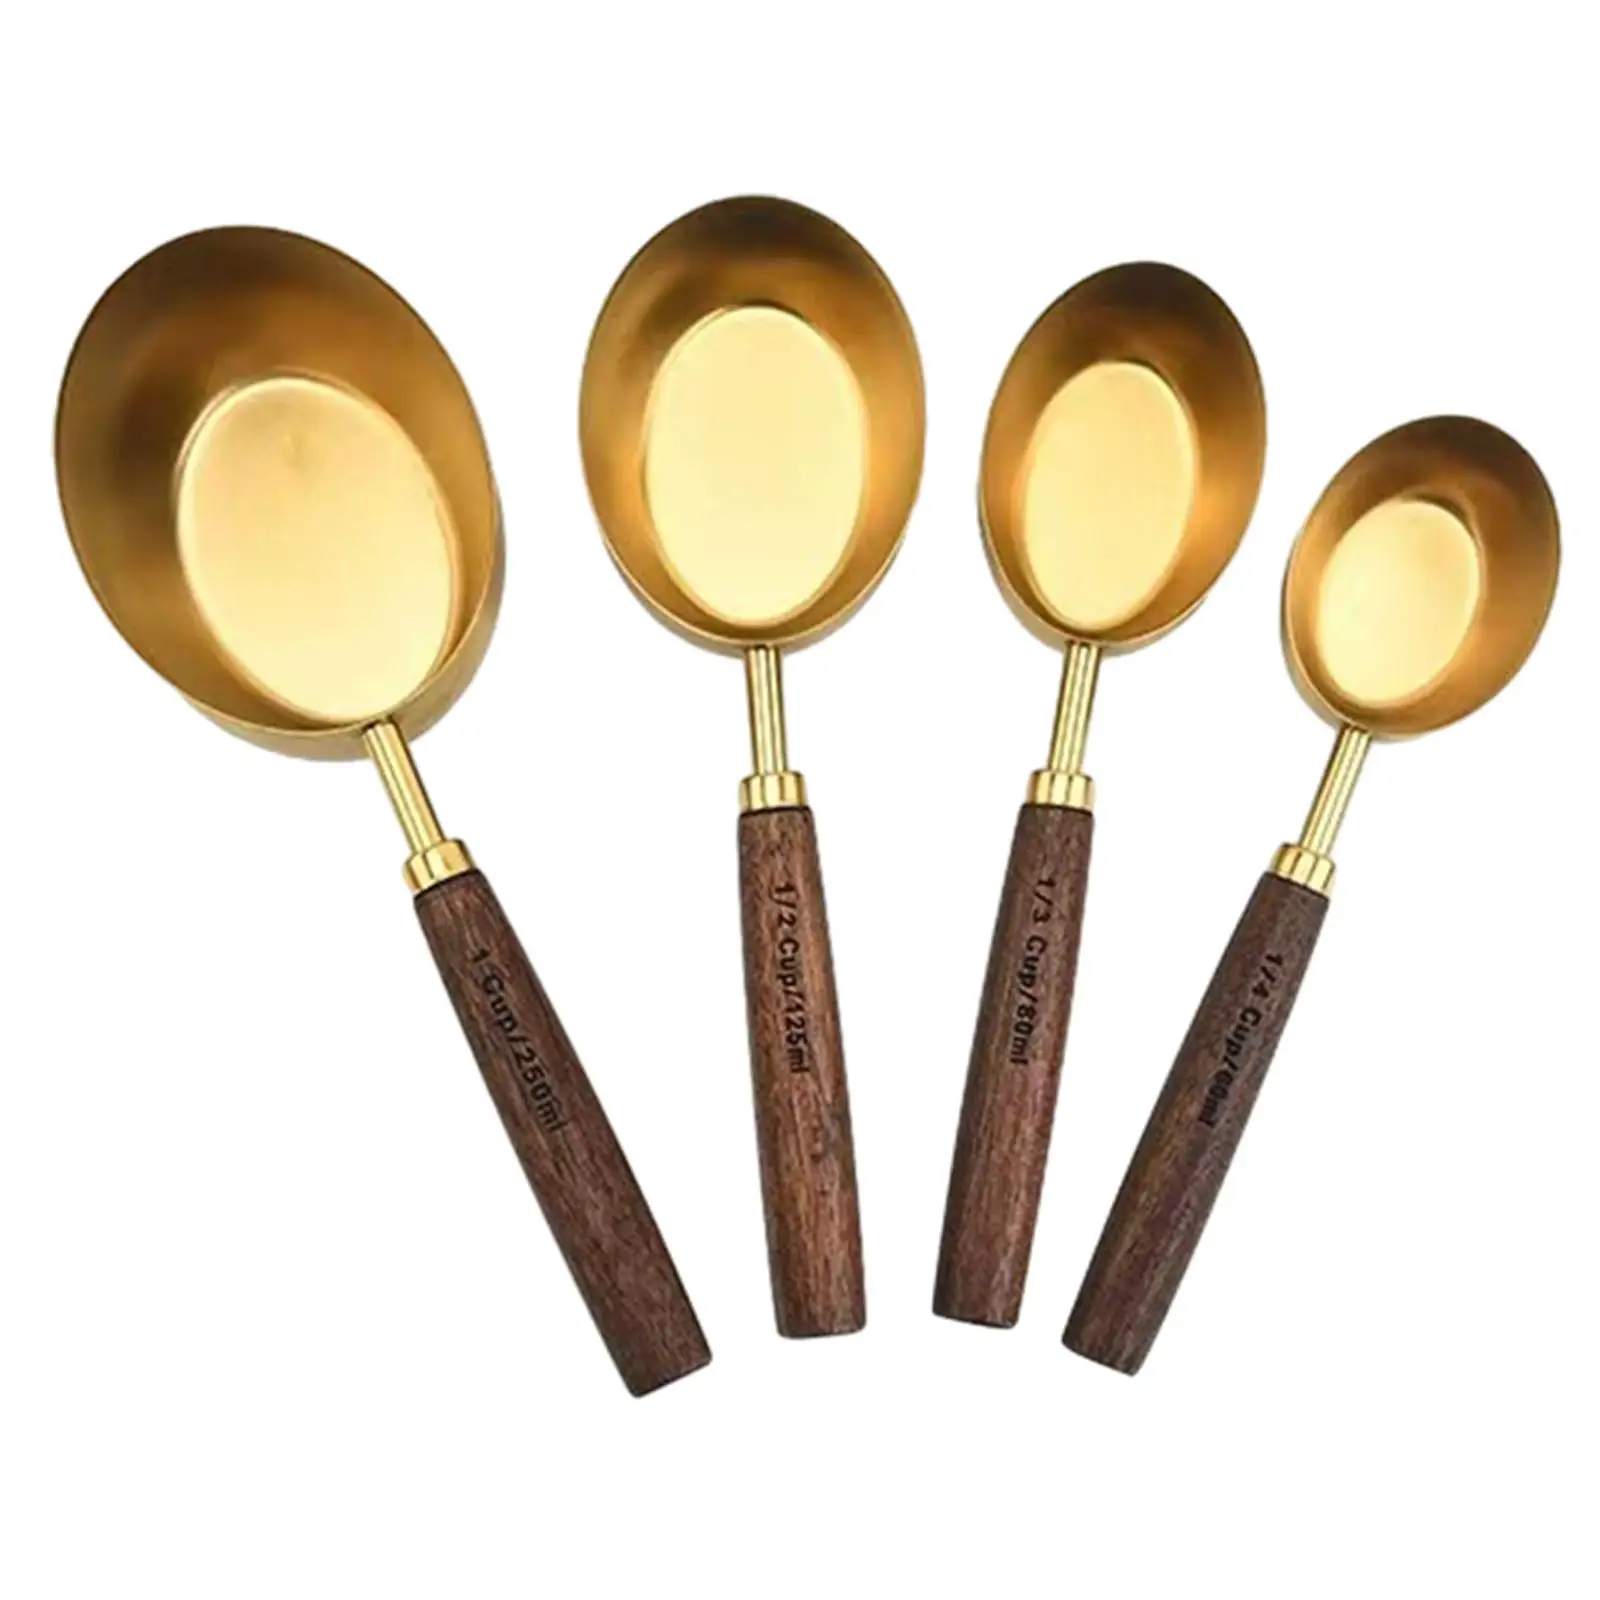 Measuring Cups Spoons Set, Measuring Baking Set, Stainless Steel Measuring Cups Stackable for Dry and Liquid Cooking Oil,